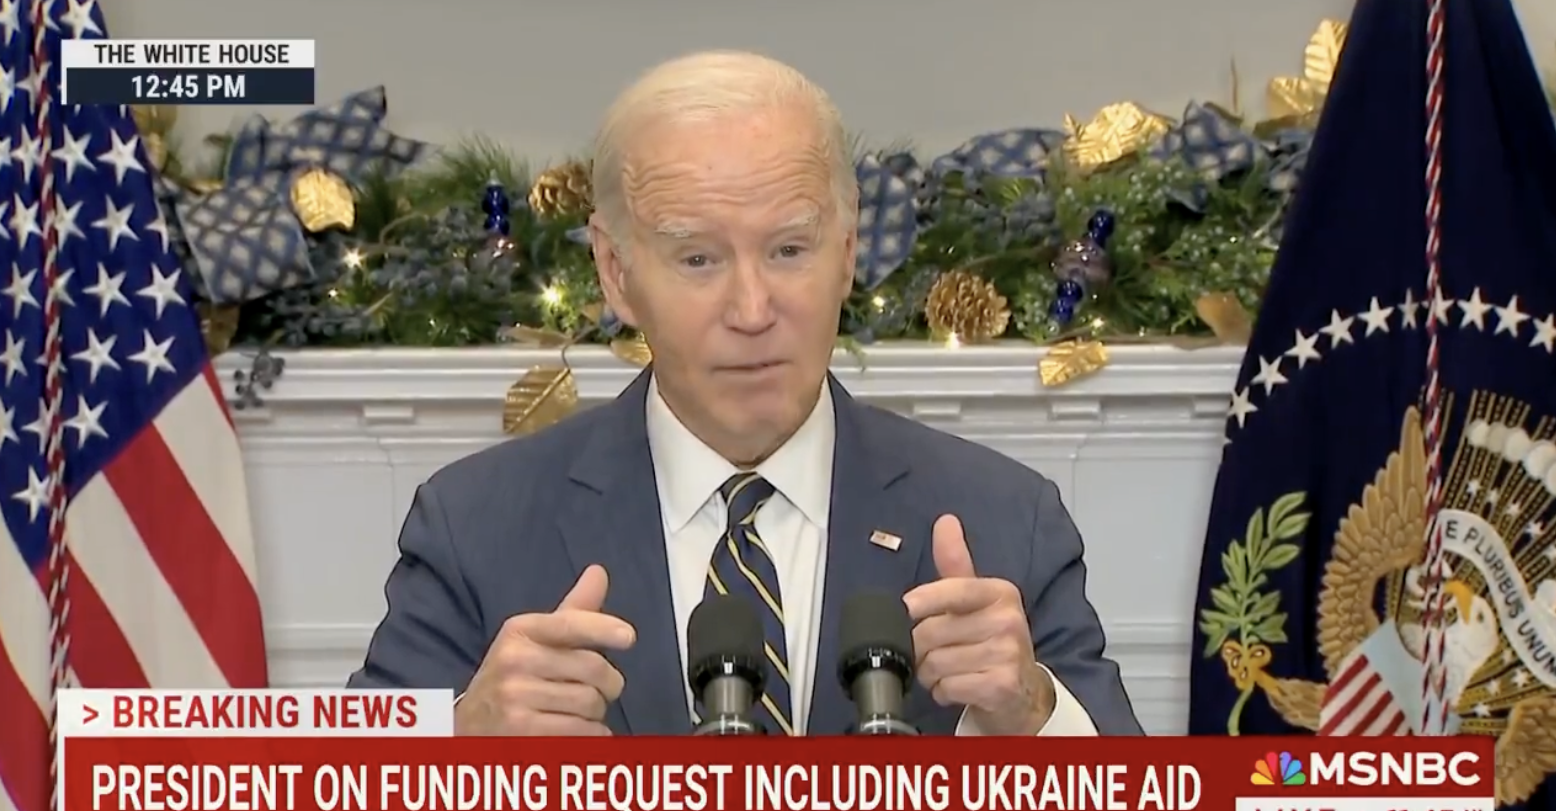 BREAKING: Biden Blackmails America To Keep Ukraine Grift Going - Give Us Money Or We Will Send Your Children To The Meat Grinder